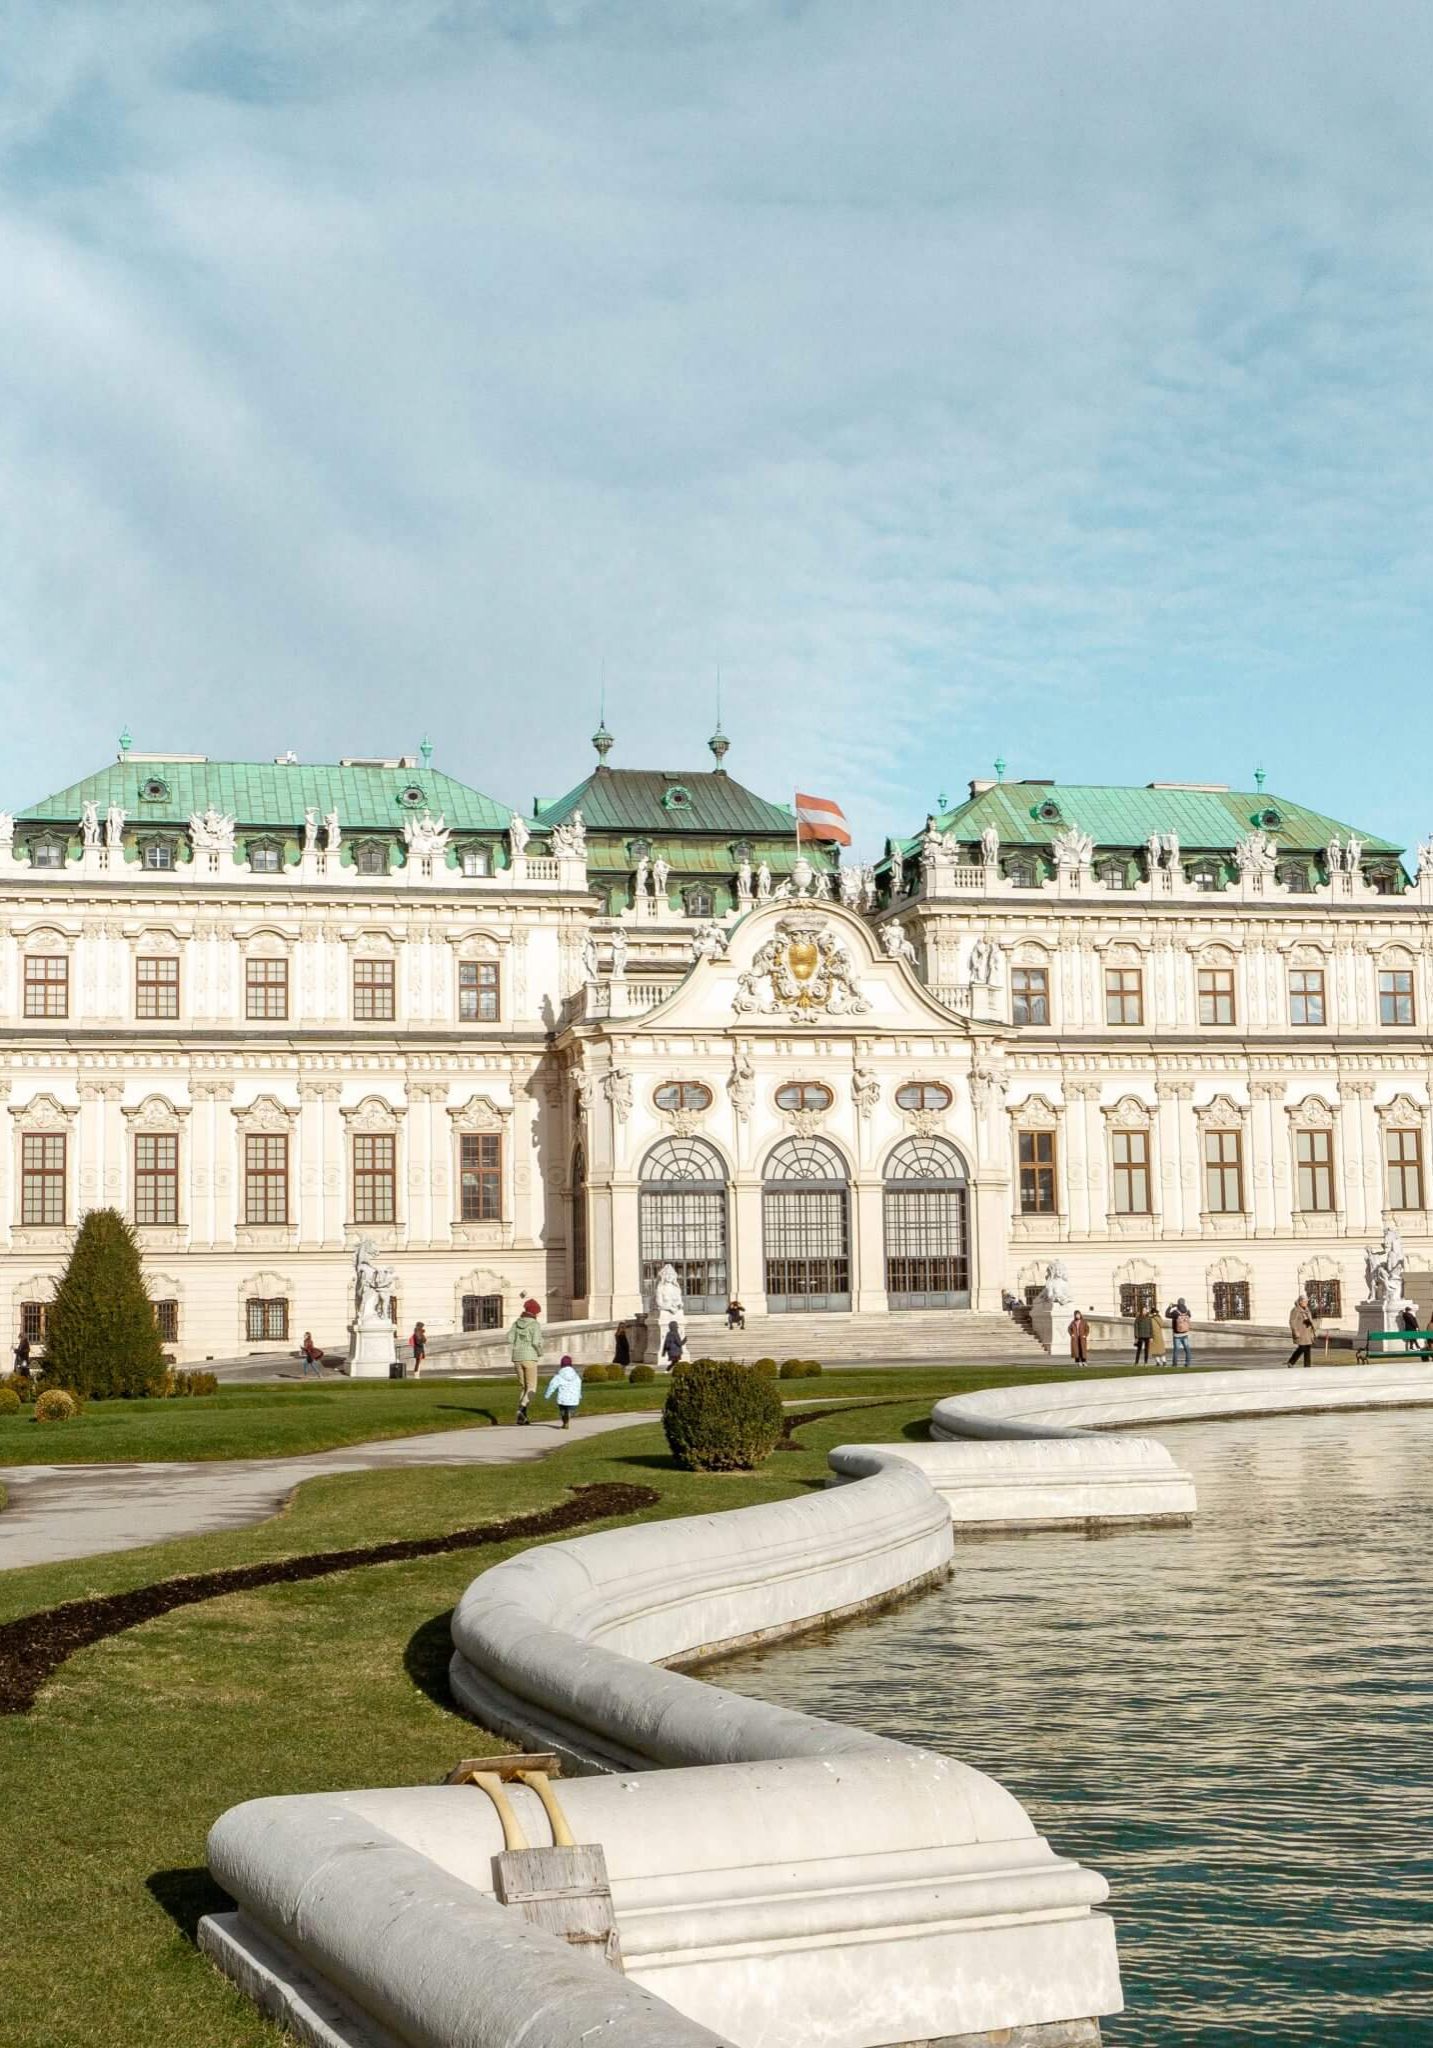 Beautiful Belvedere Castle which you can find in Austria's Capital, Vienna